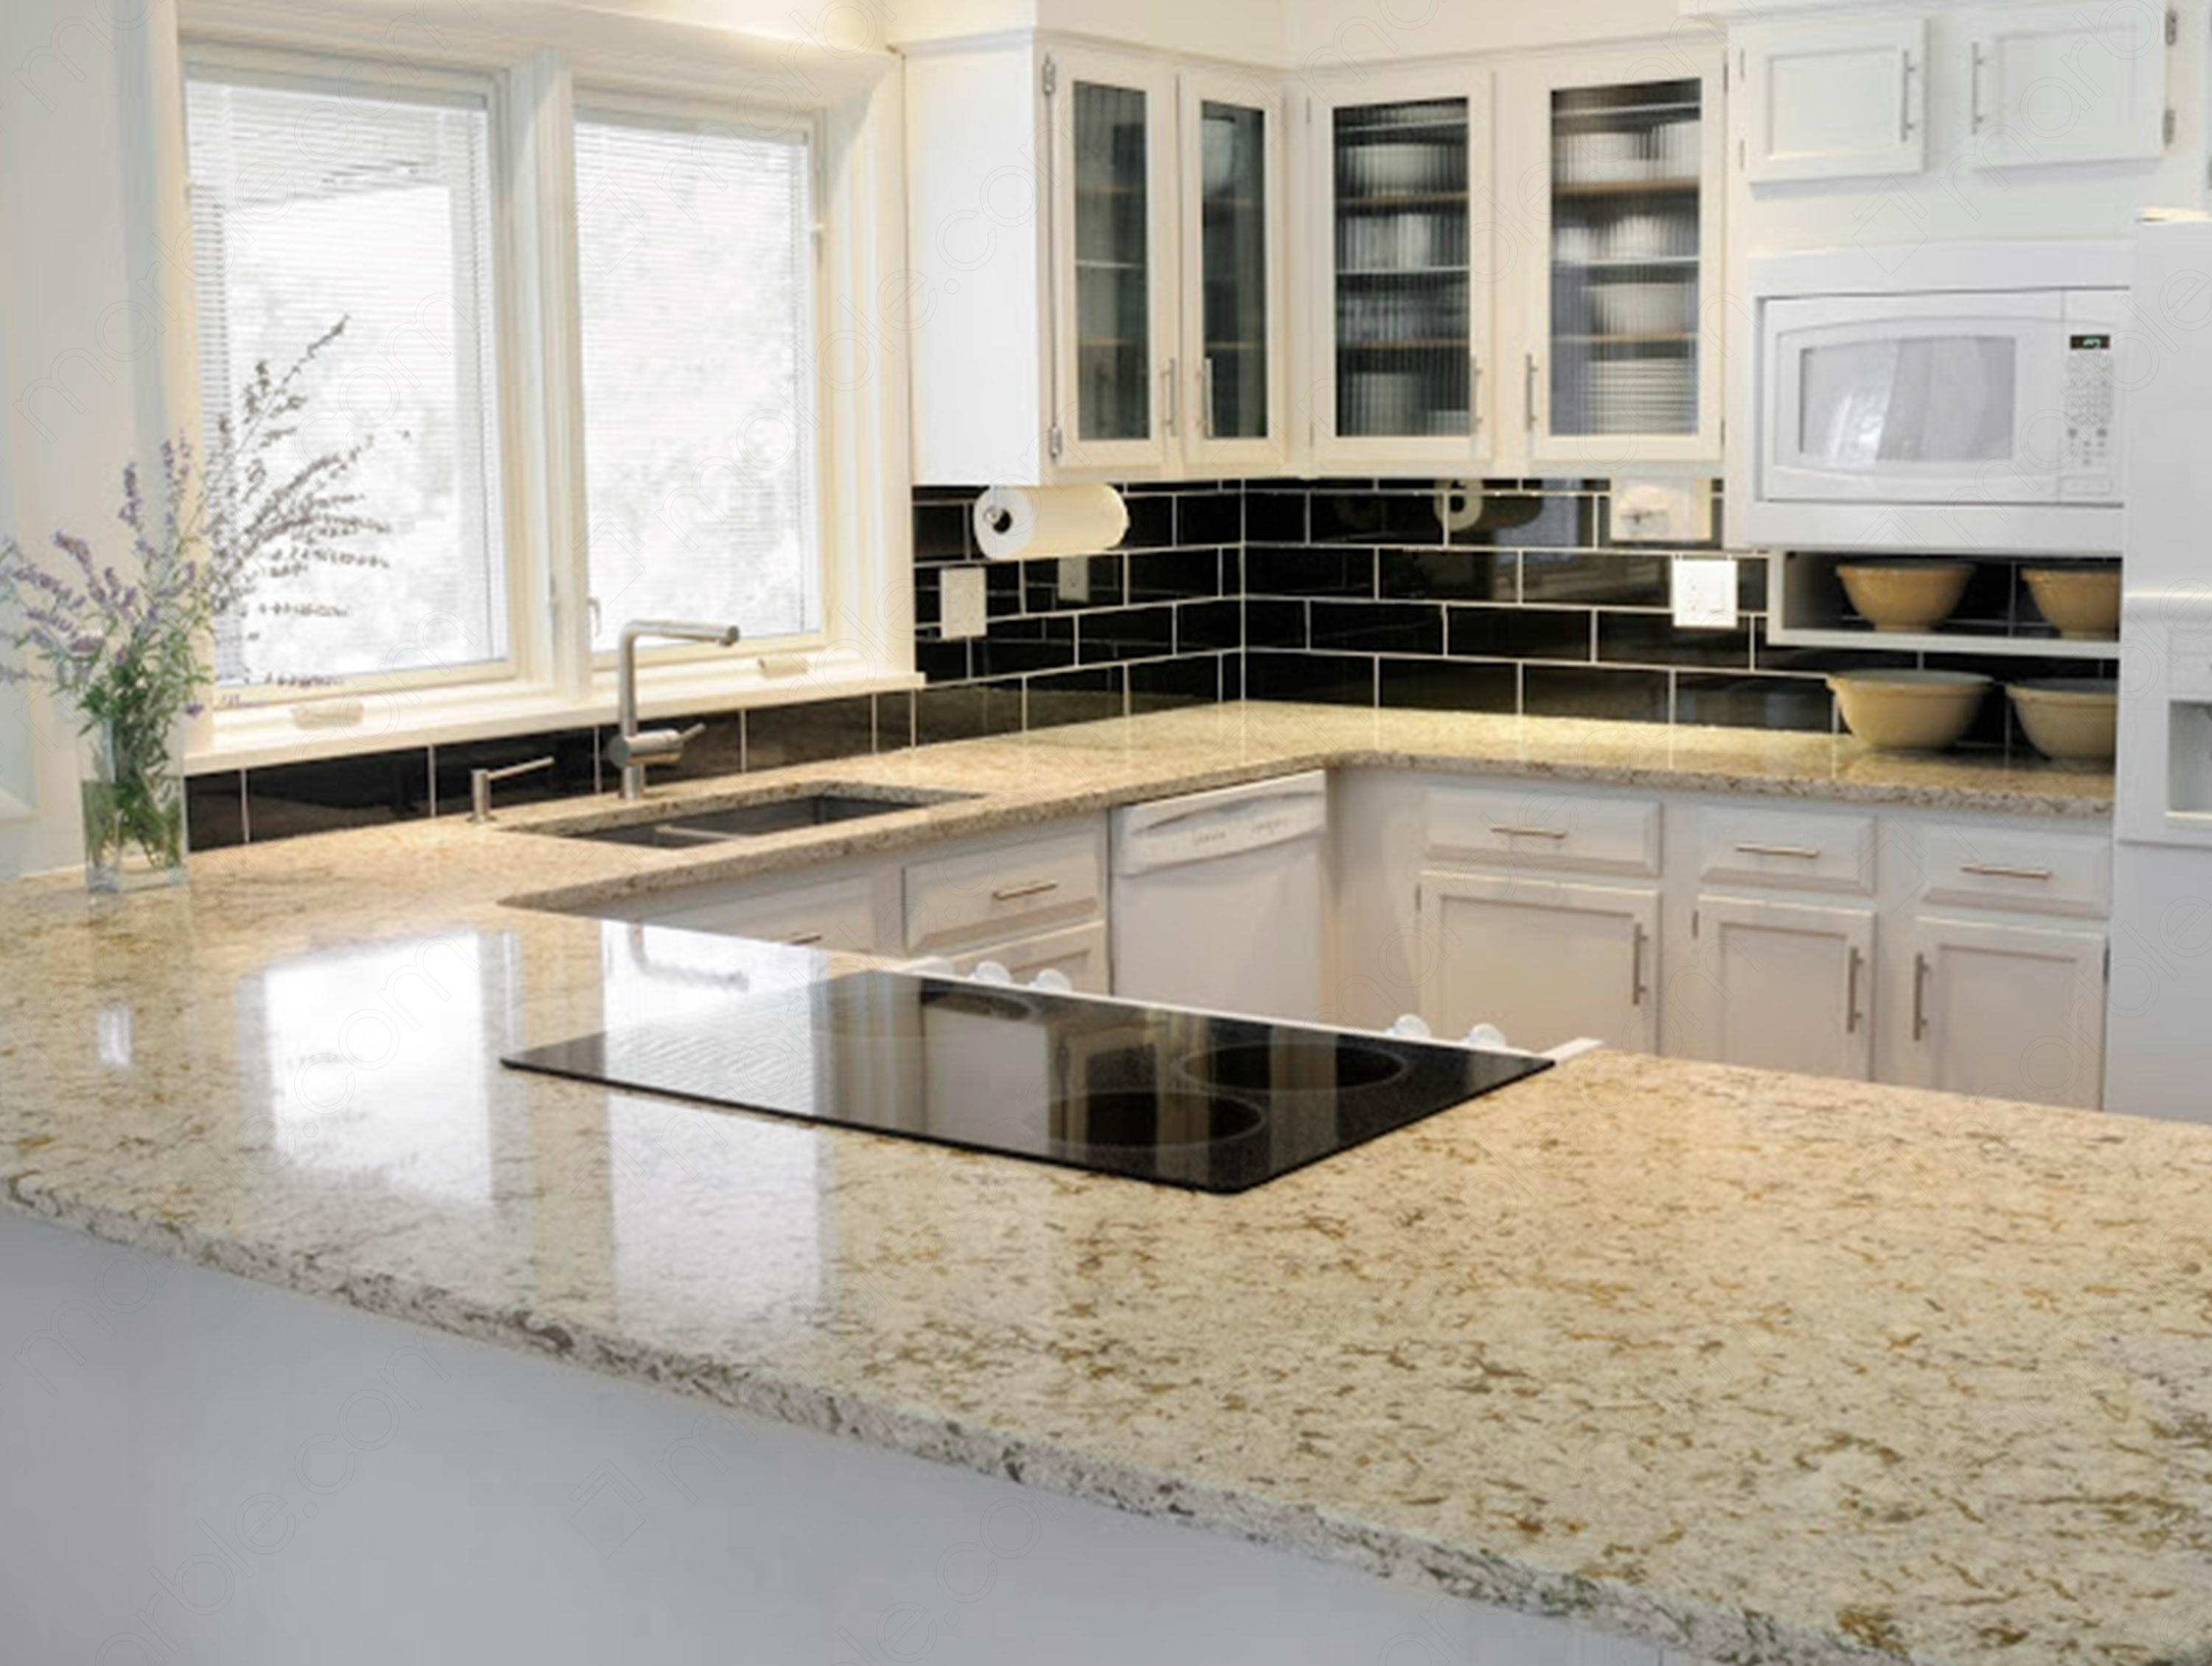 How To Make Granite Seams Disappear, What Is Bad About Granite Countertops